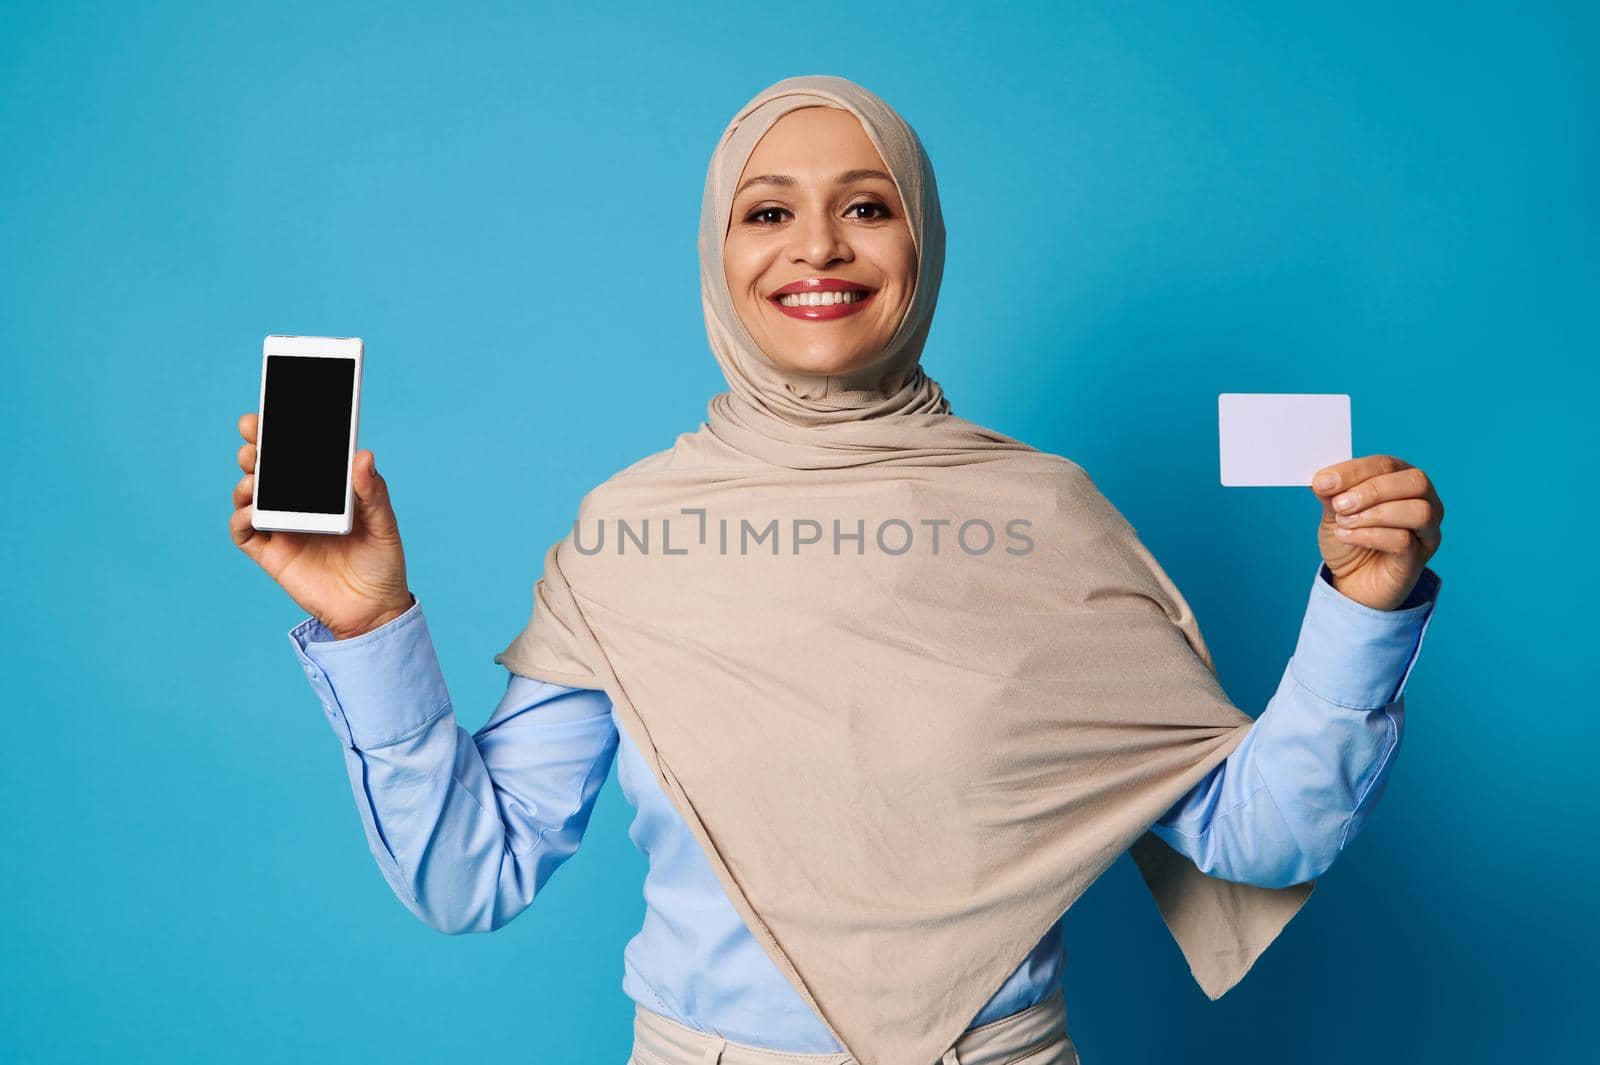 Young woman with beautiful smile holding a white blank plastic card in her hands, posing over blue background with space for text